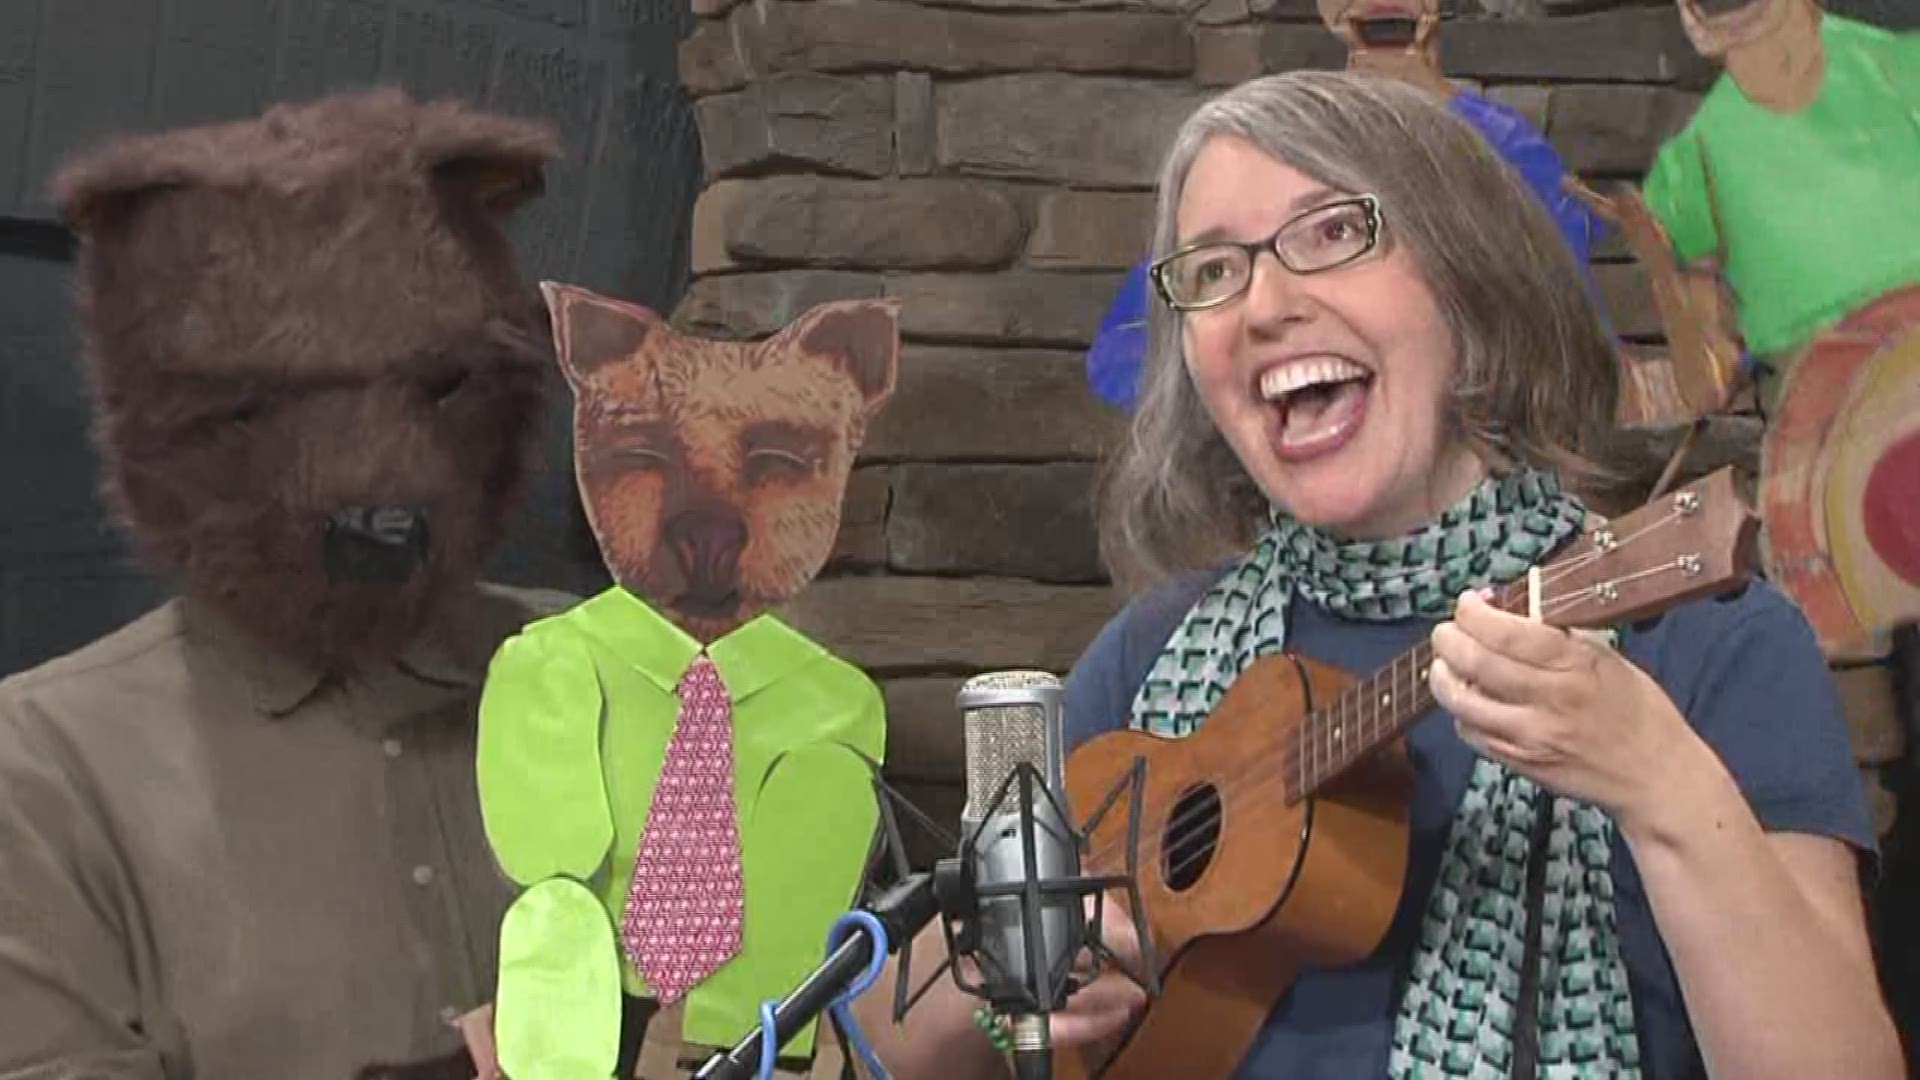 Grammy-Nominated Artist Molly Ledford performs before her show at Kidstuff at the Visitors Center this weekend.